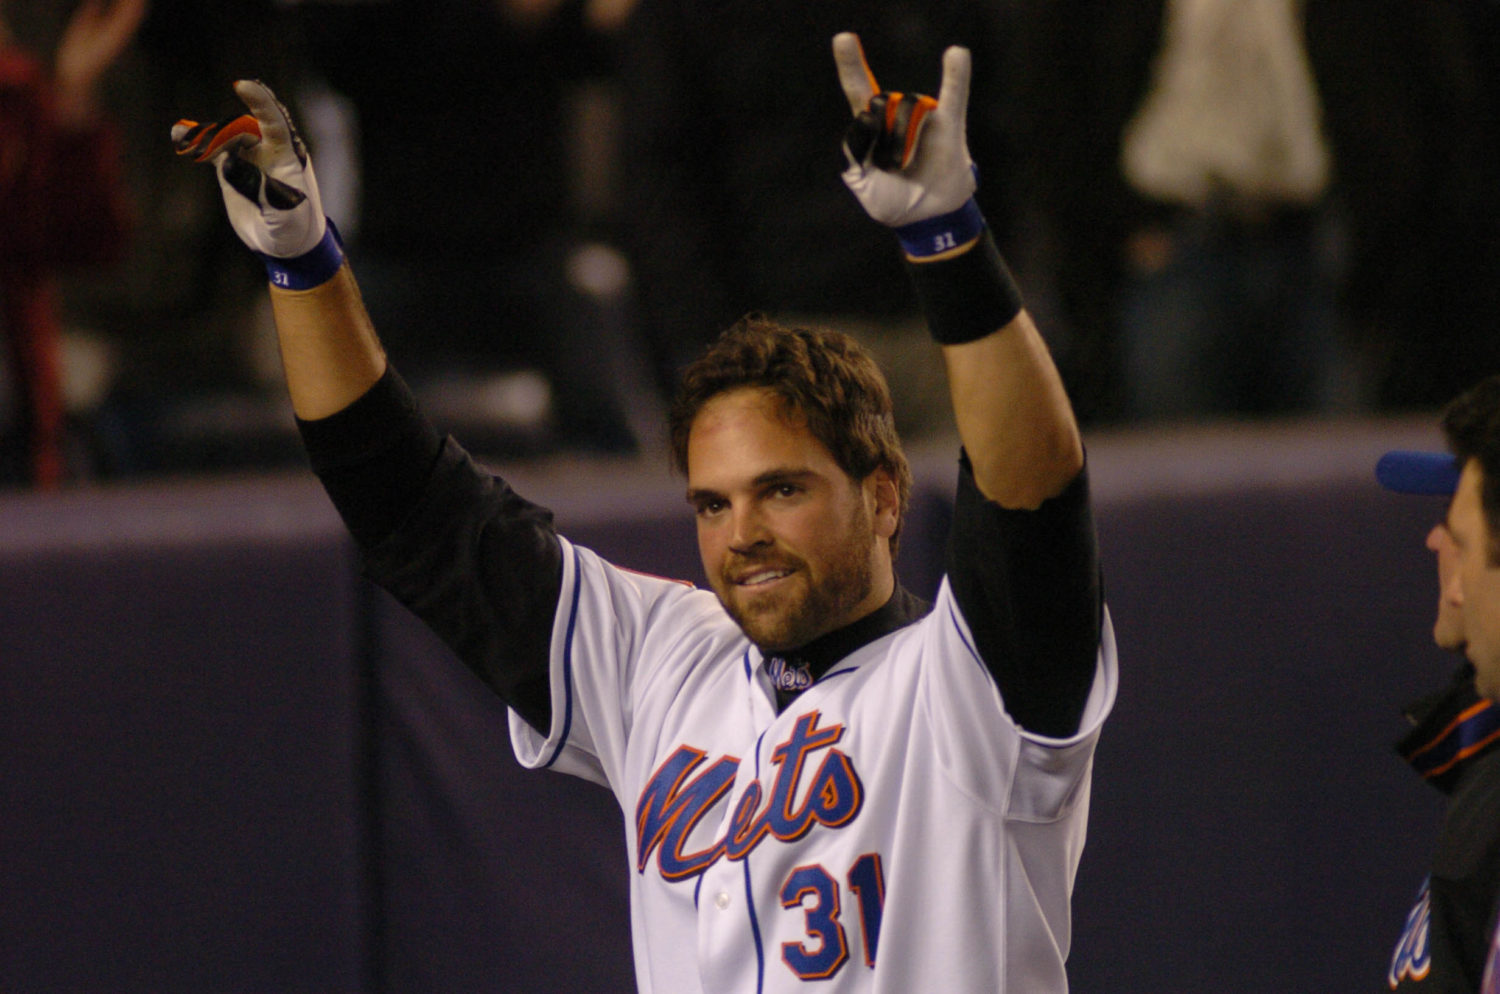 Mike Piazza Hits Walk-Off Home Run in 11th Inning